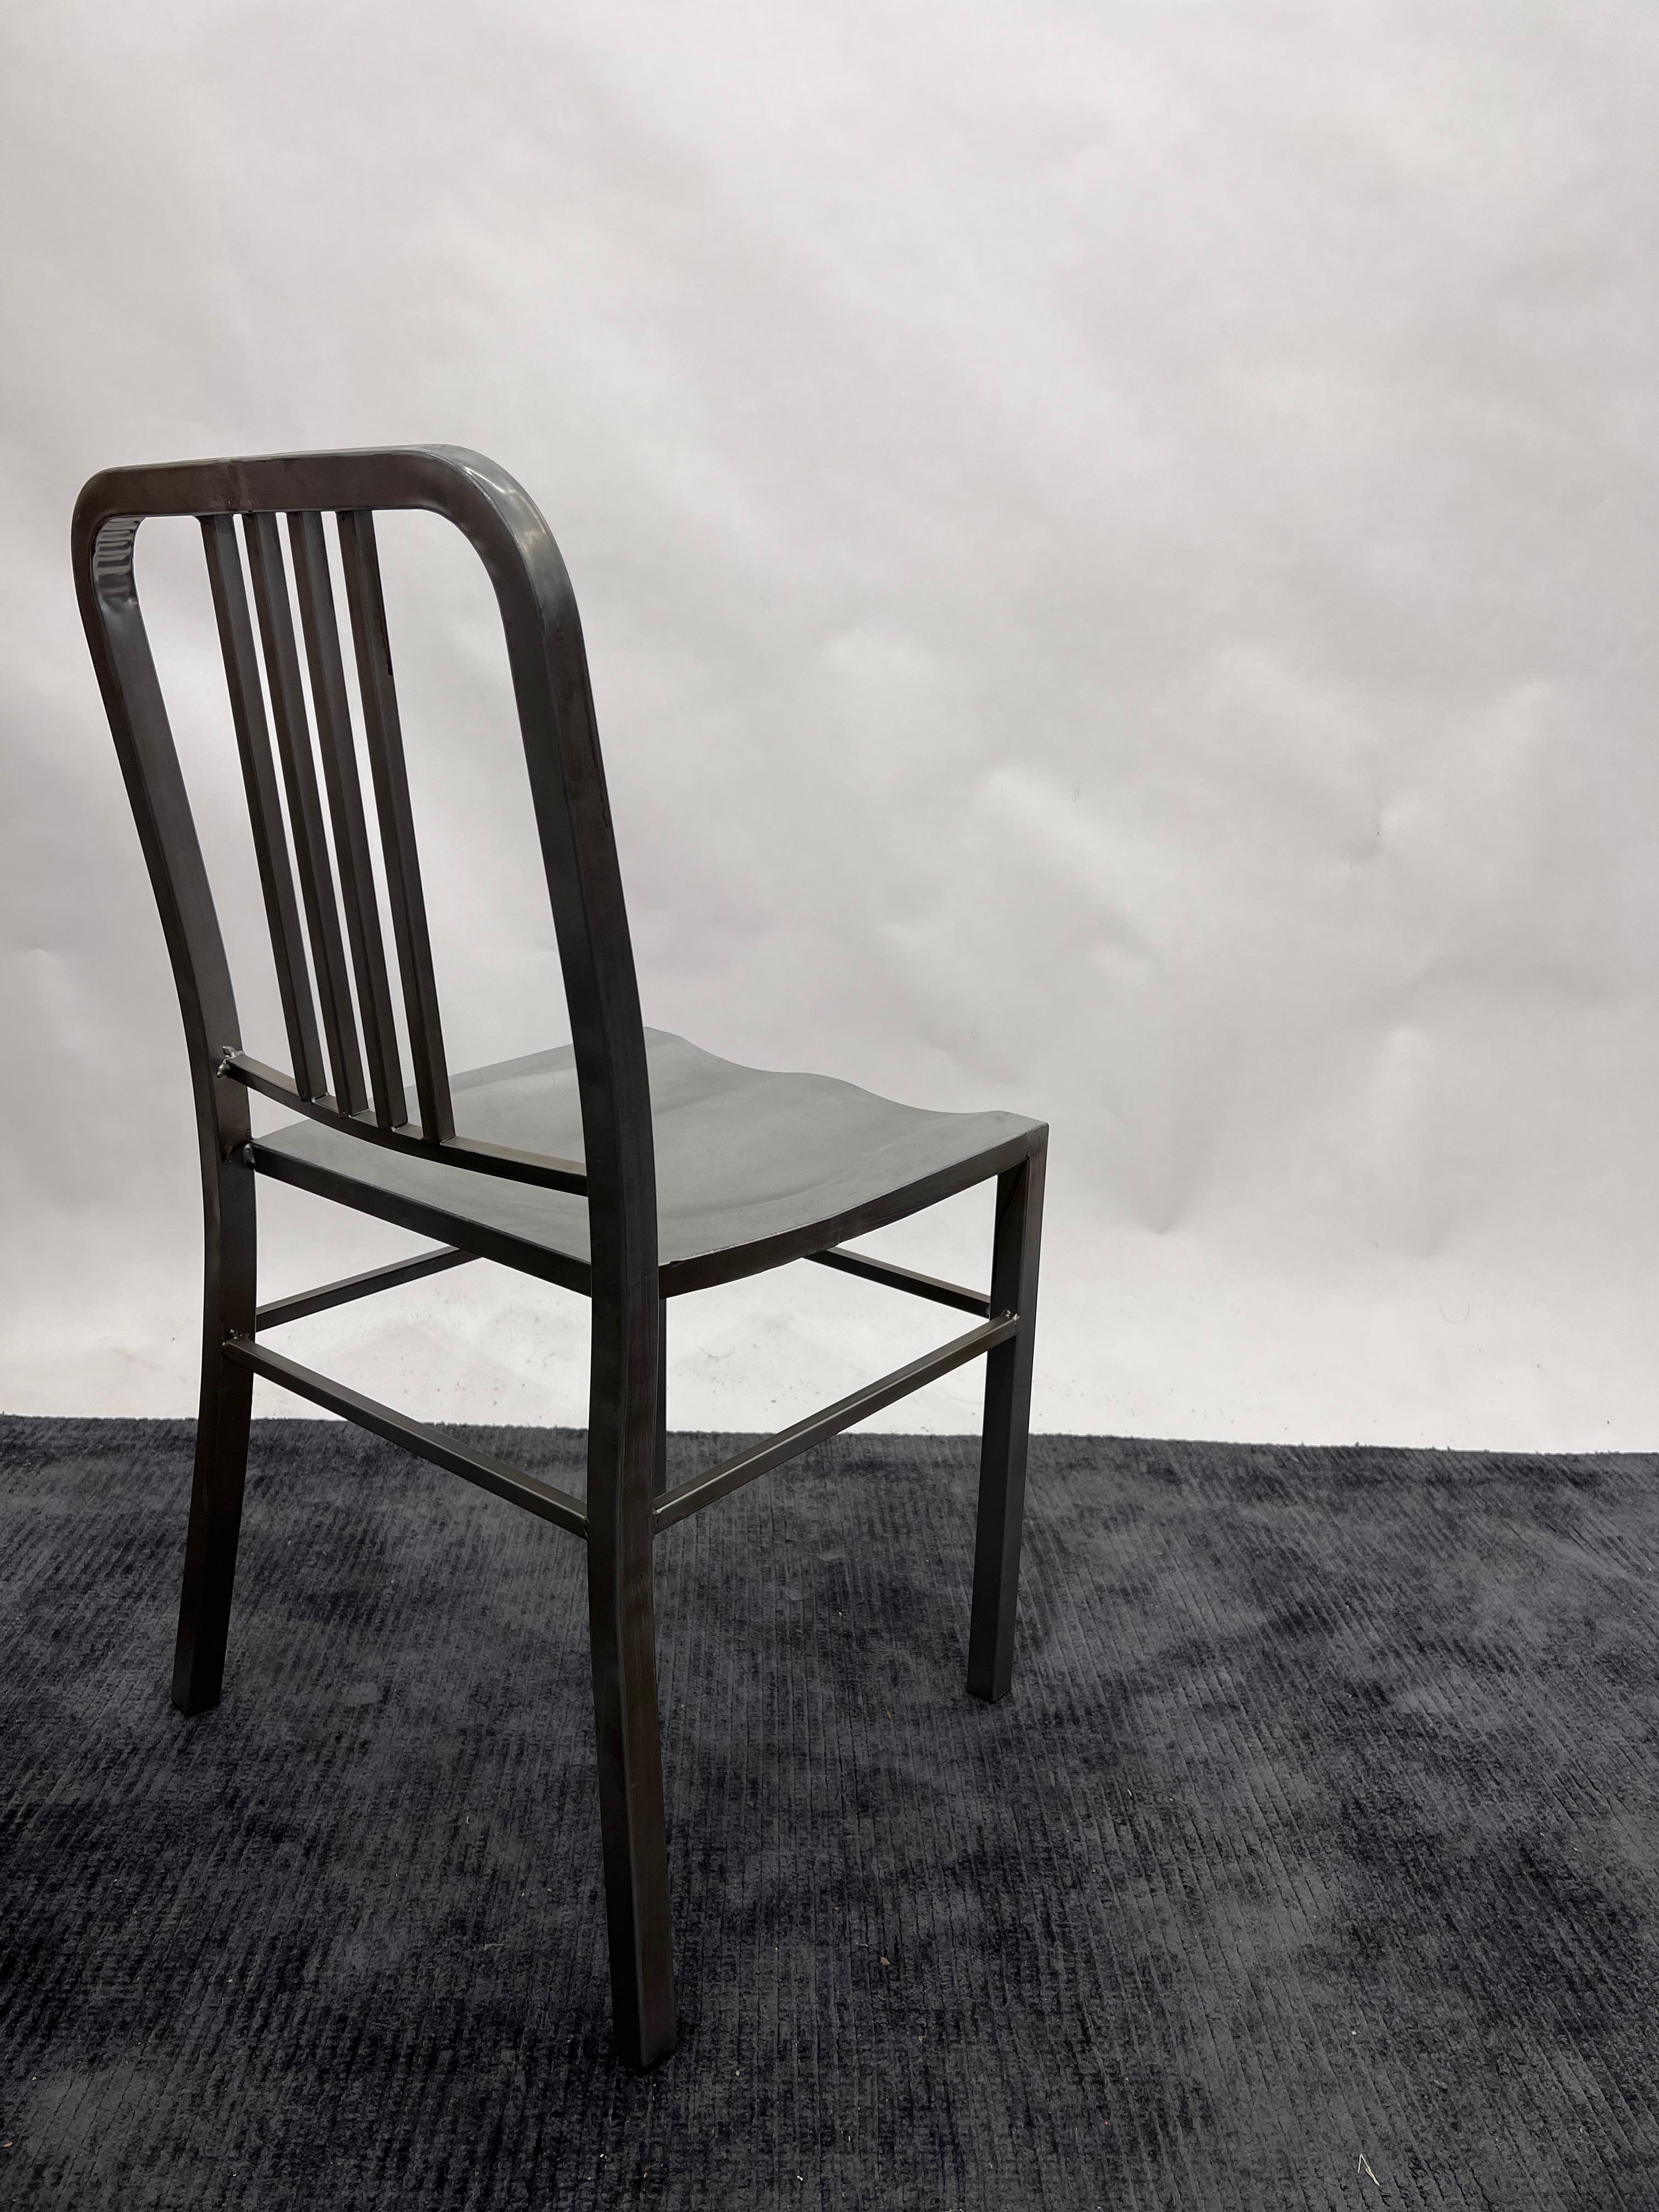 Styled after the iconic hand-made aluminium seats originally designed for the US Navy in 1944. Set of 6 very sturdy all metal constructed chairs.

Measures: 17.25 seat height 
Backrest height 32”
16”D 
15.5”L

In vintage condition, with